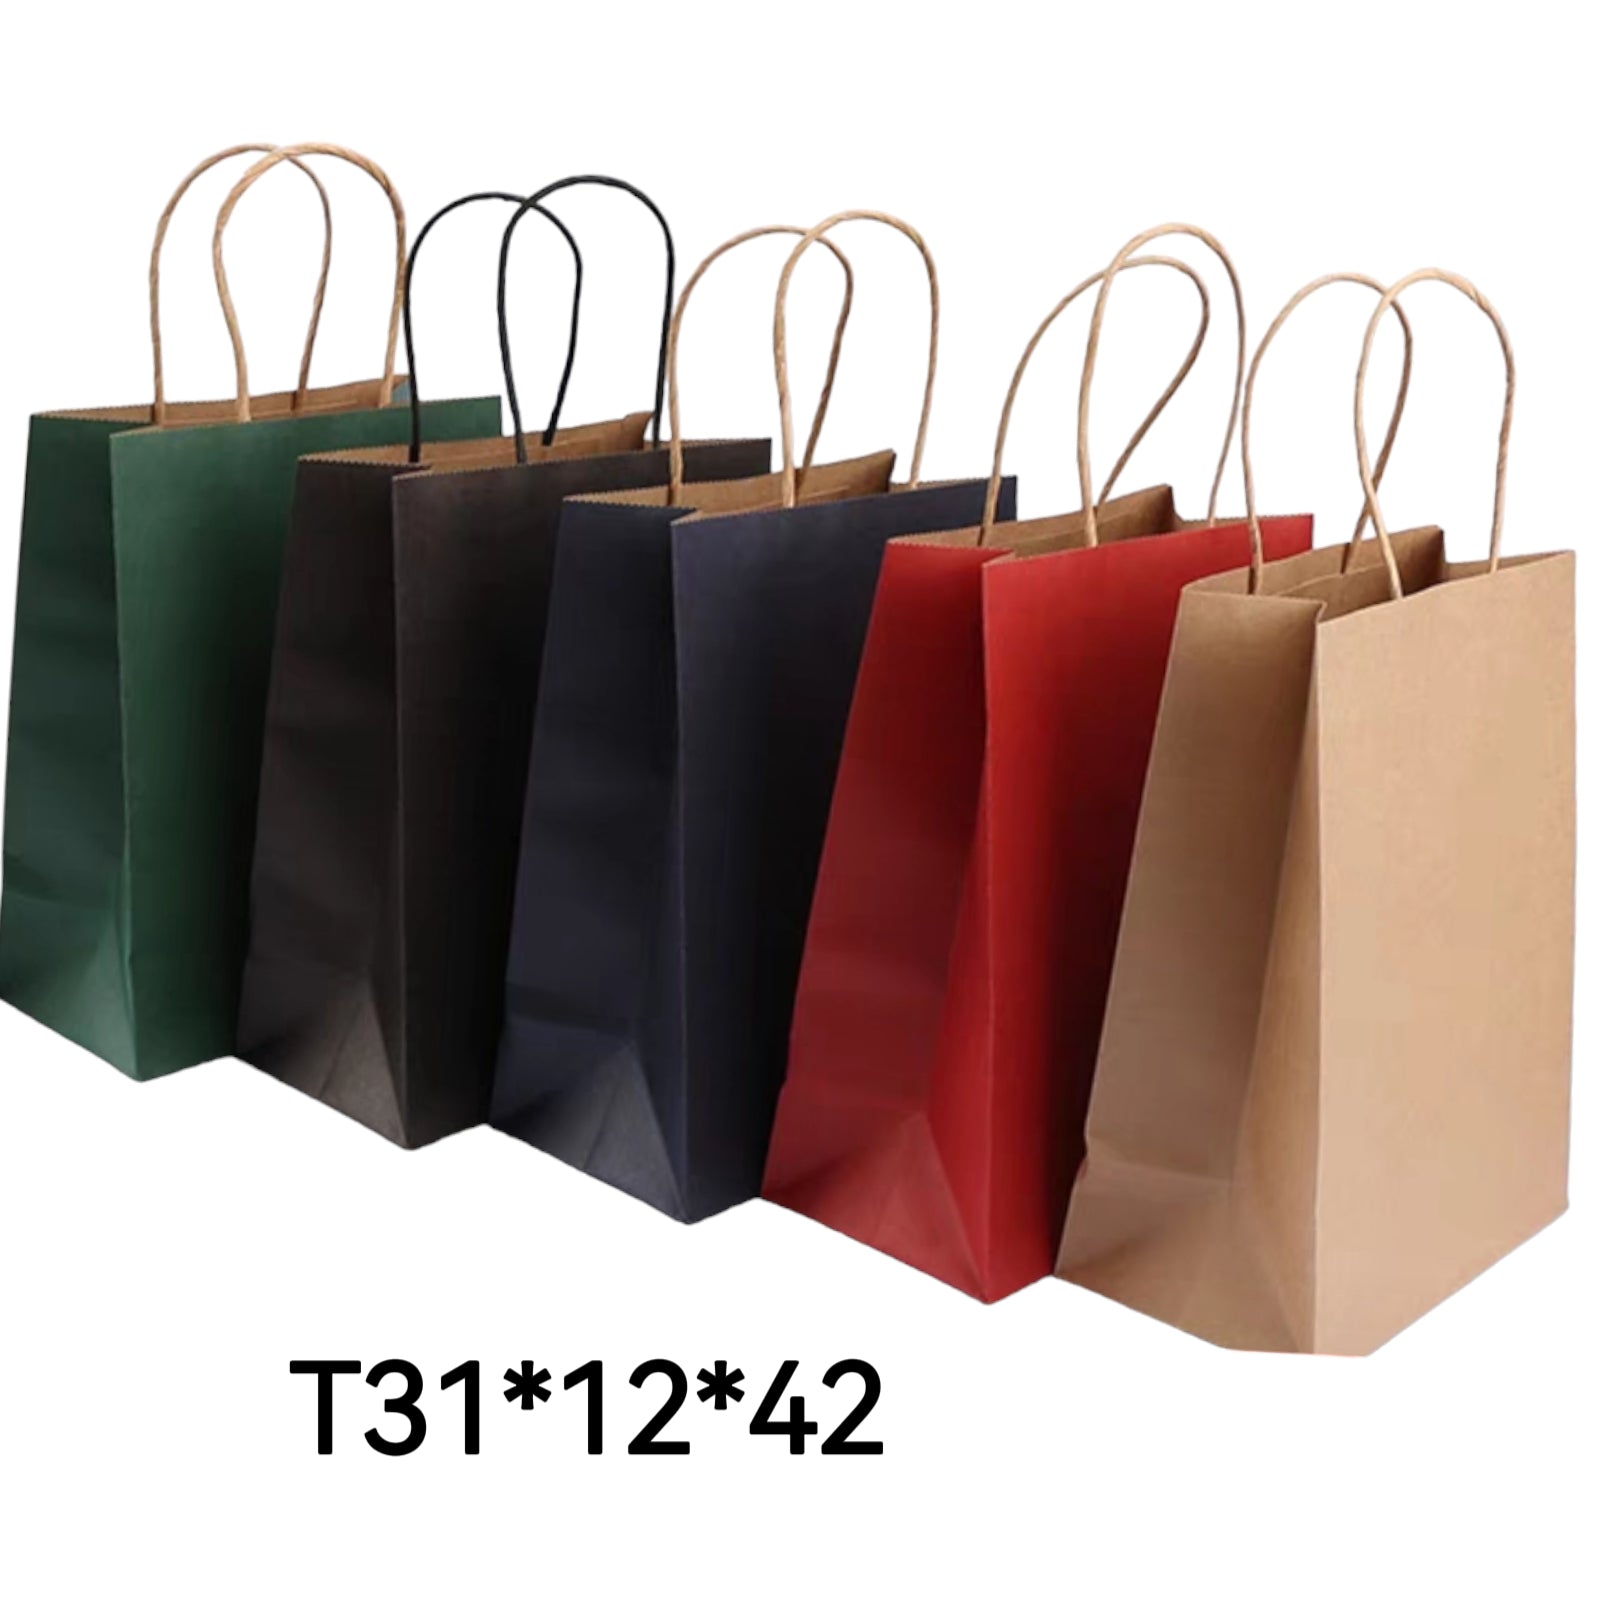 SET OF 24 - Boutique kraft bags (colors of your choice) T31*12*42